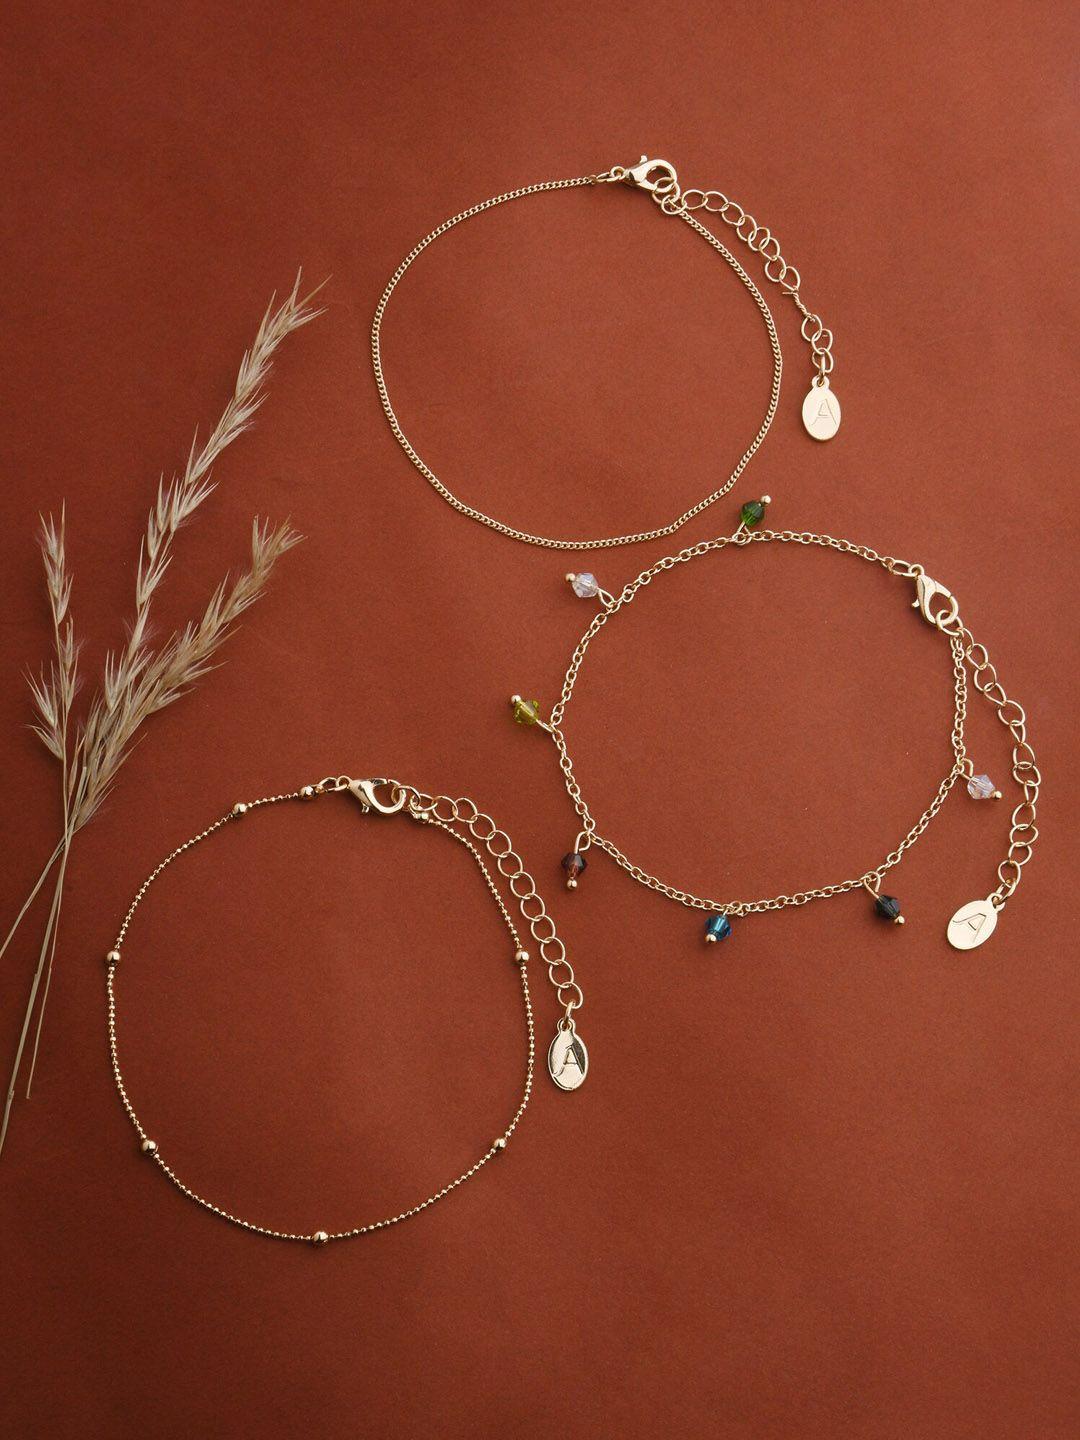 accessorize set of 3 beaded anklets